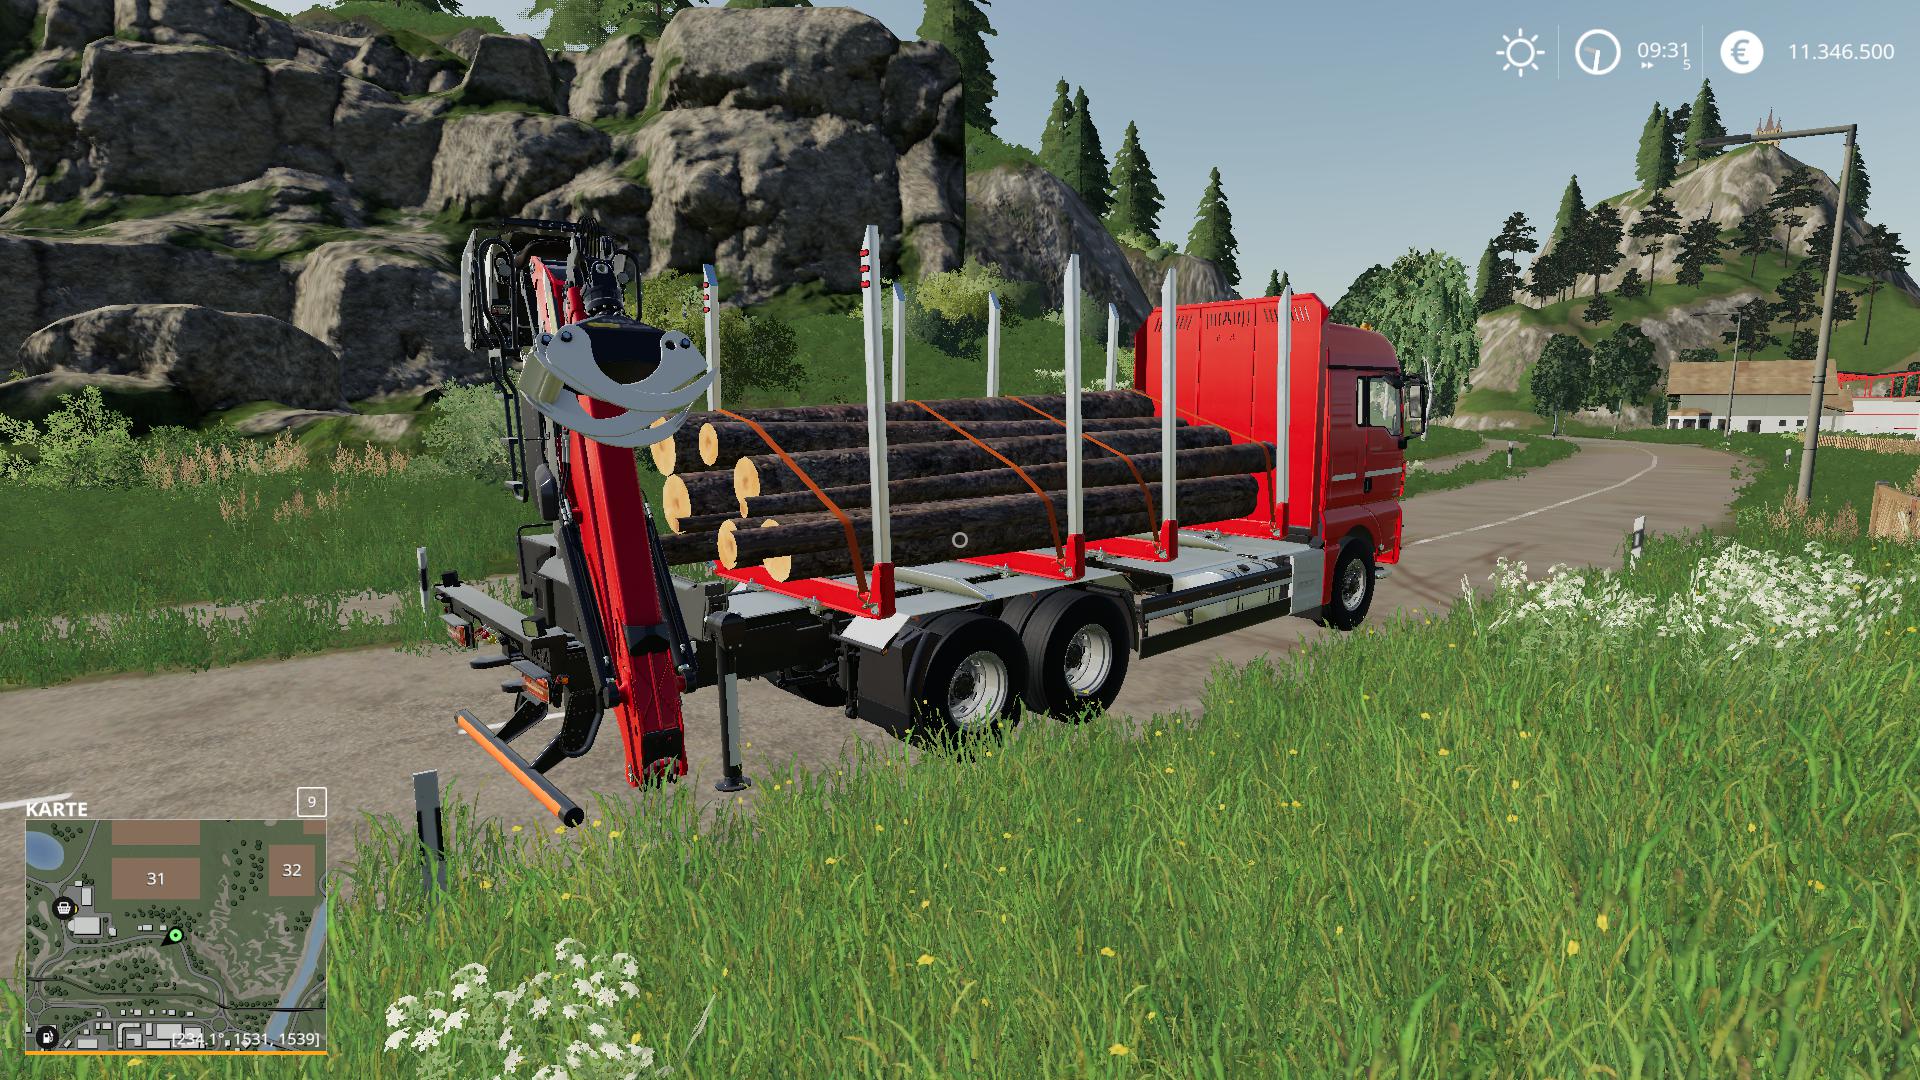 MAN Forst LKW with Autoload Wood v 2.0